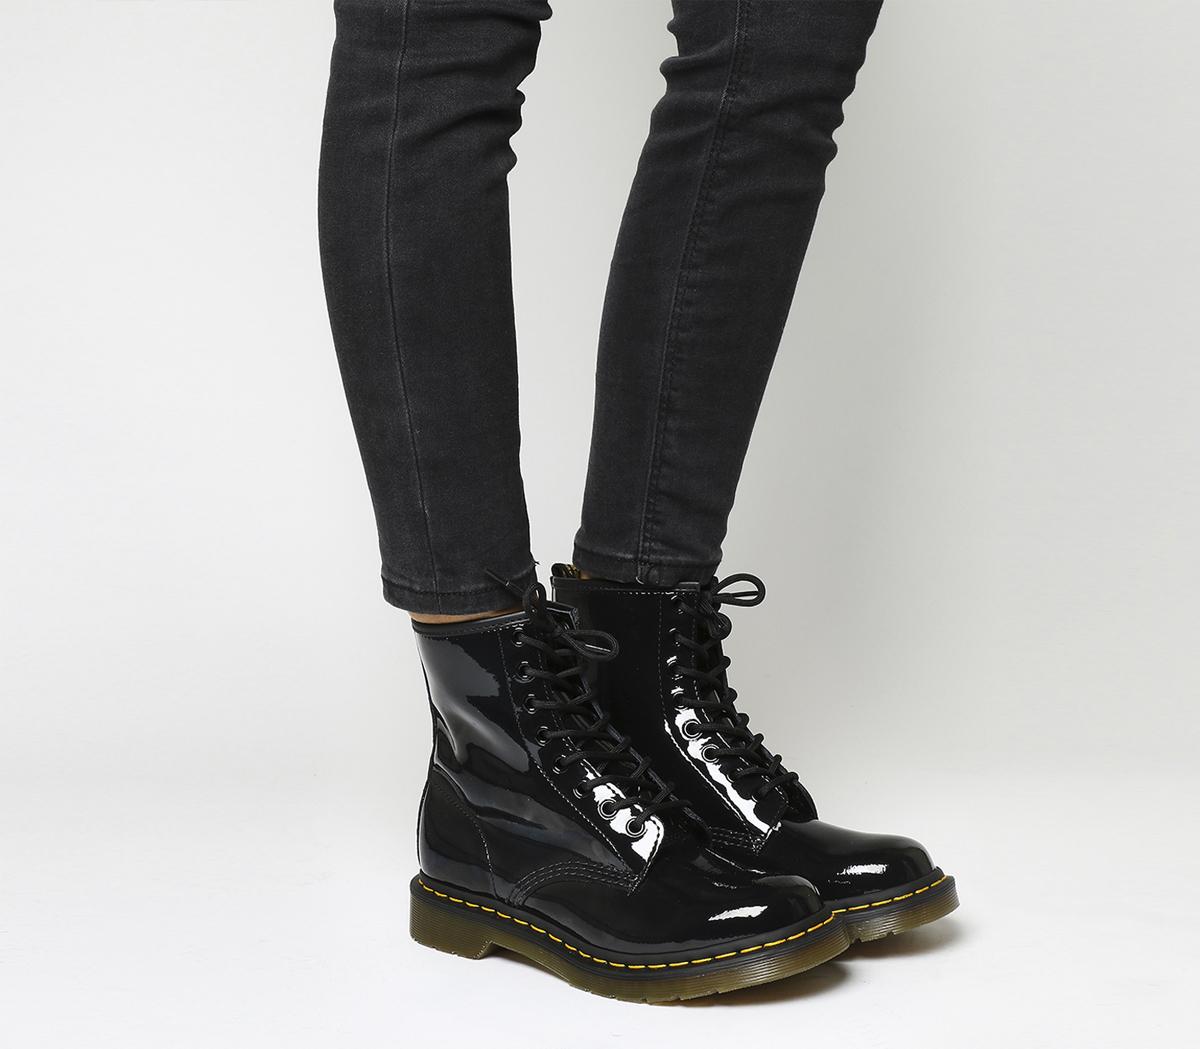 womens patent dr martens boots